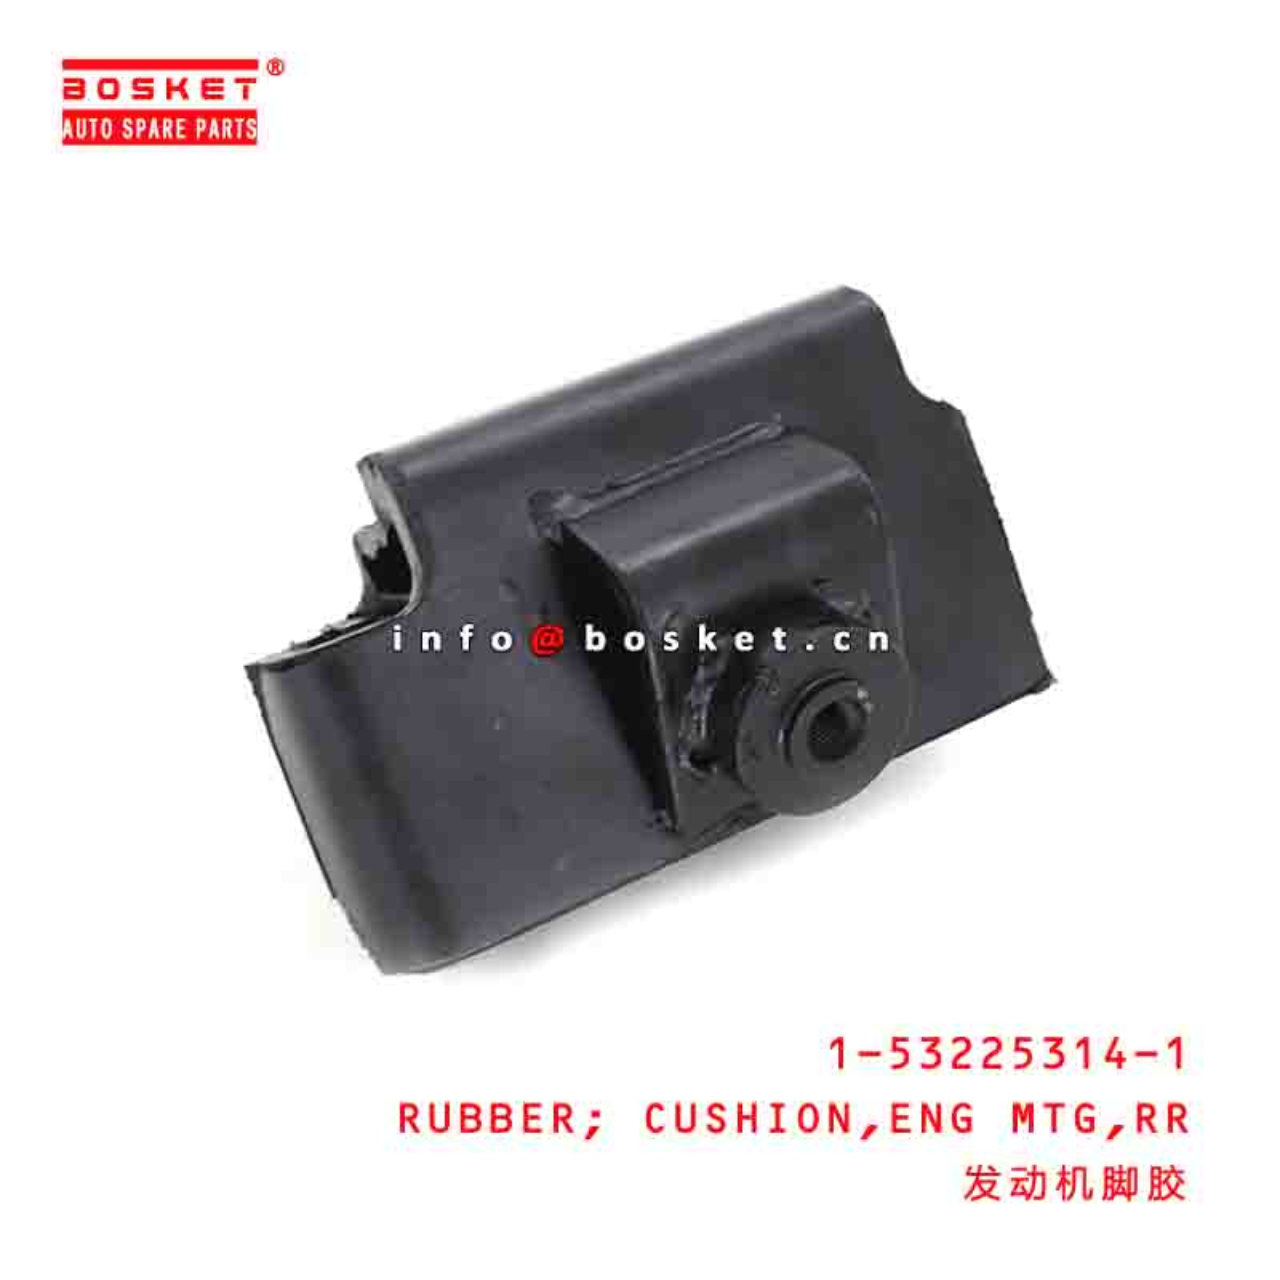 1-53225313-1 1532253131 REAR ENGINE MOUNTING CUSHION RUBBER RH Suitable FOR ISUZU LT132 6HE1